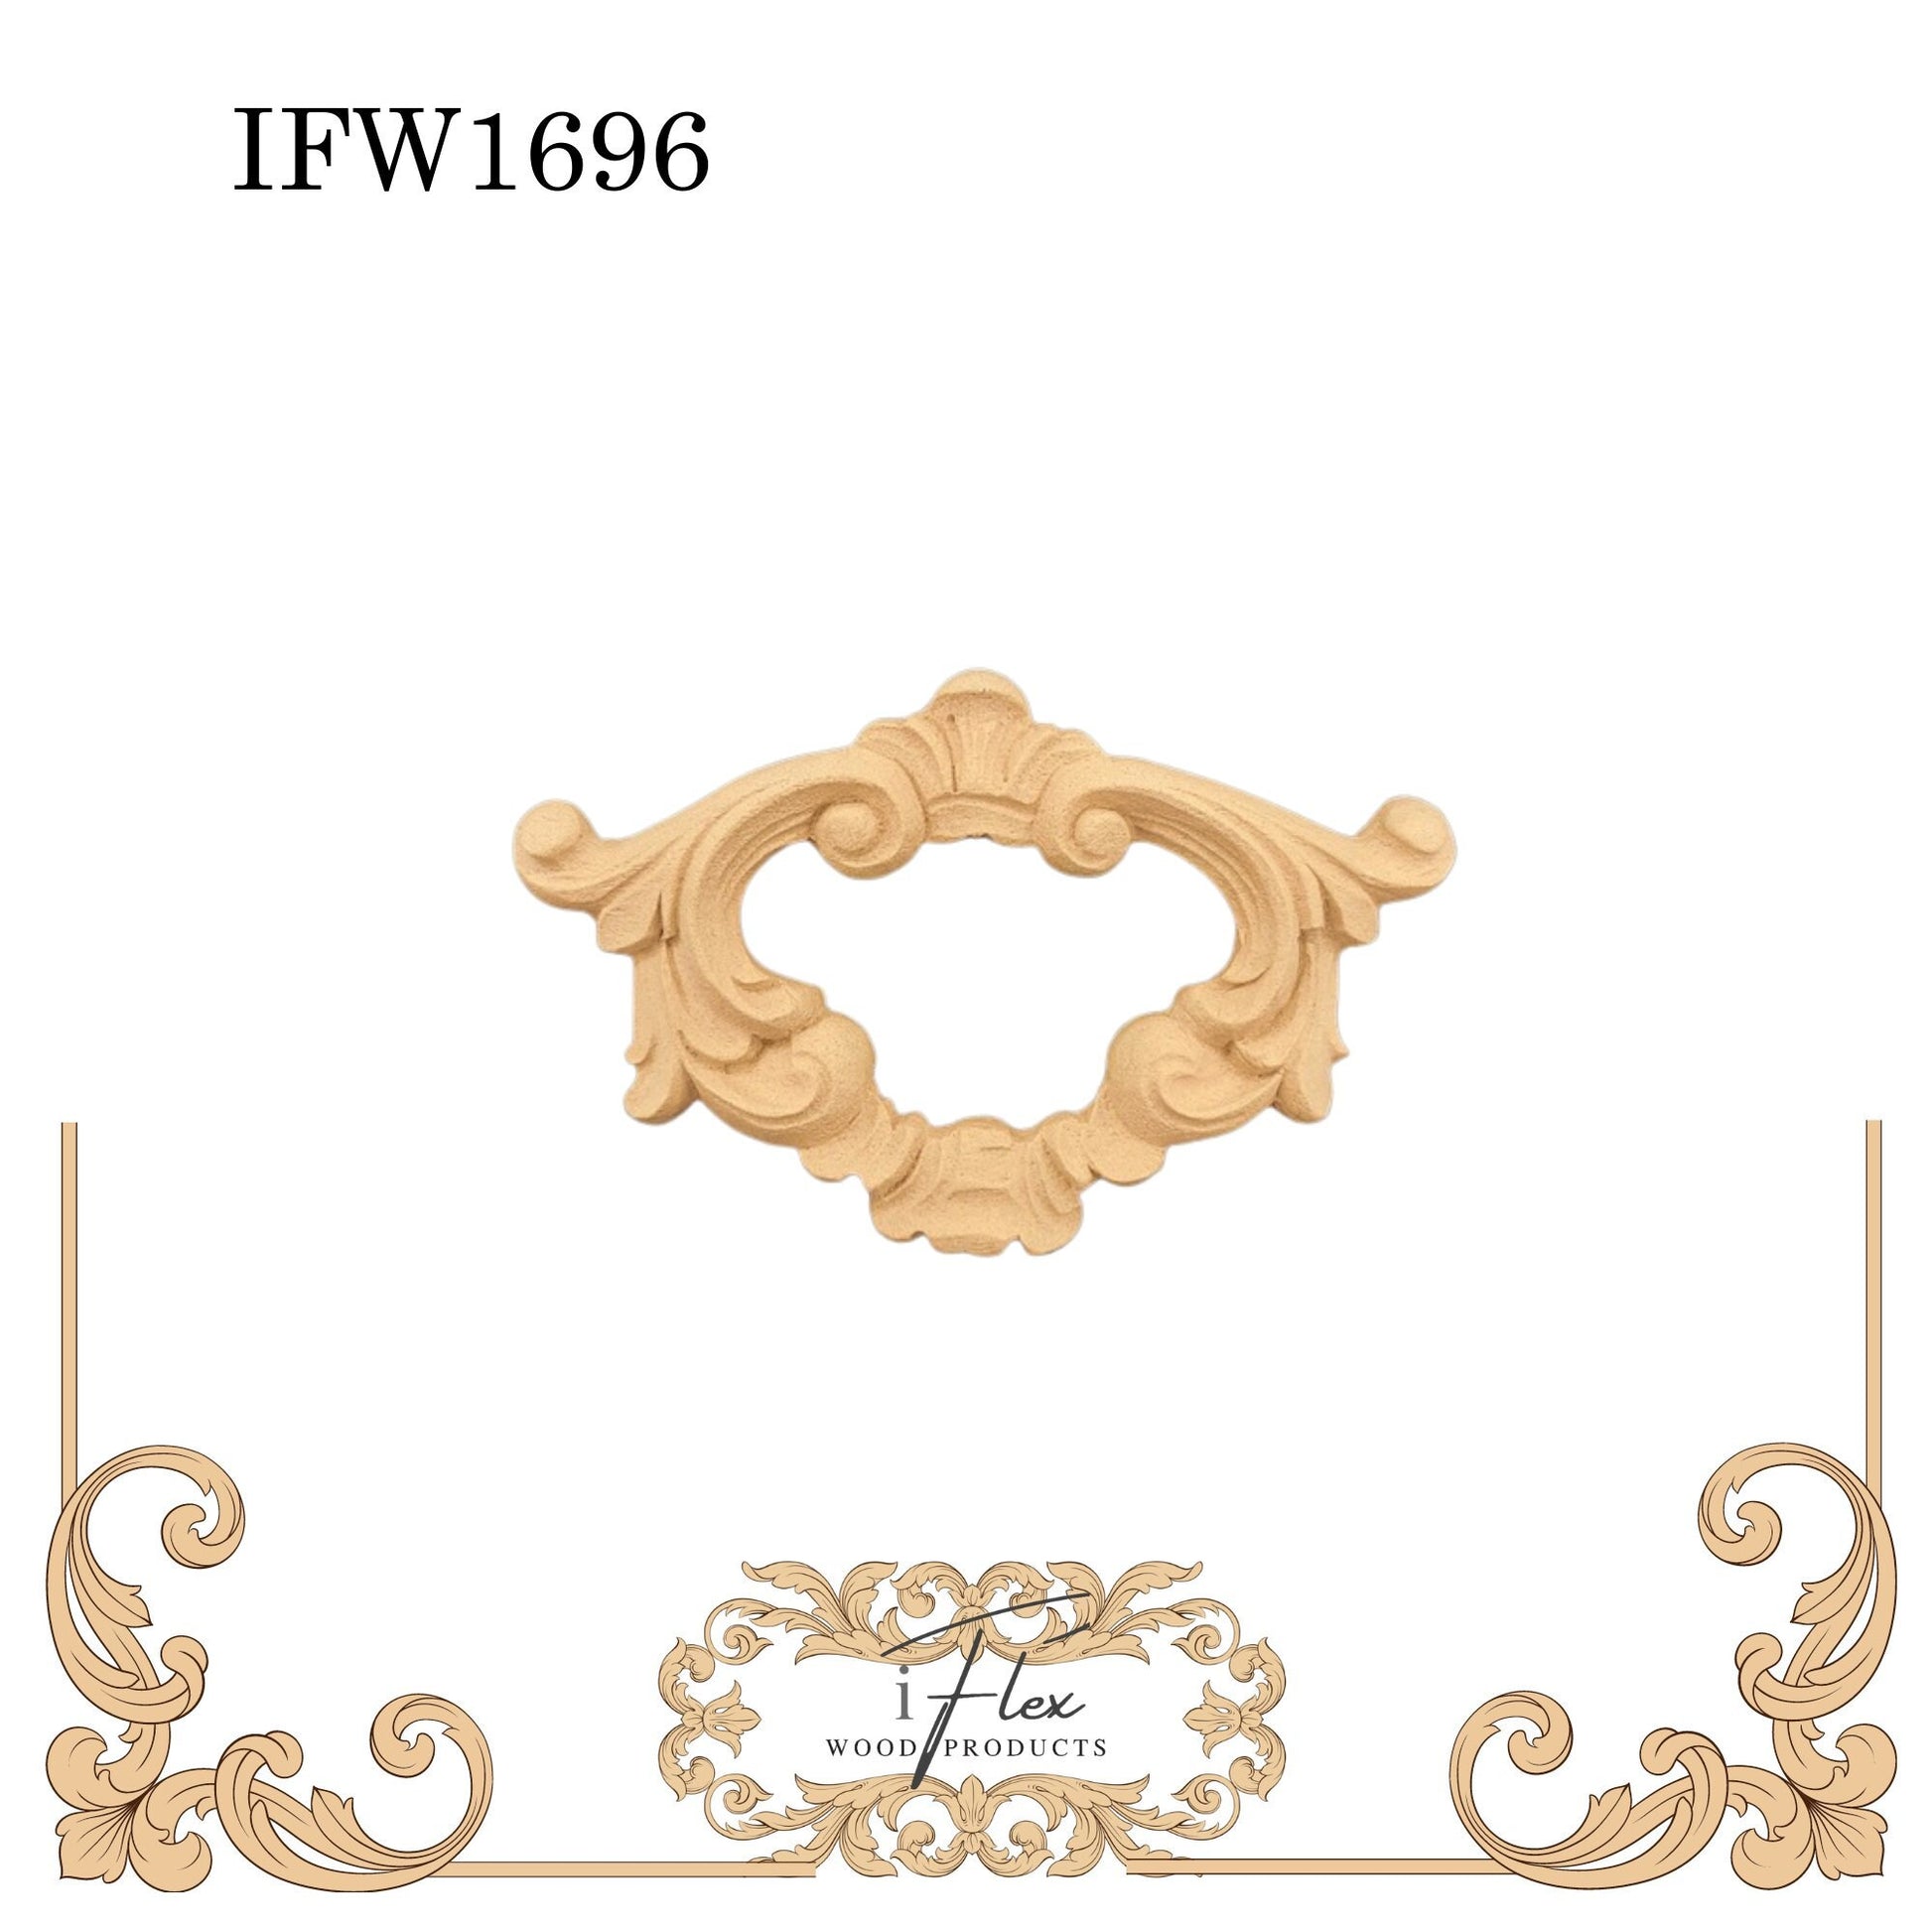 IFW 1696 iFlex Wood Products, bendable mouldings, flexible, wooden appliques, centerpiece